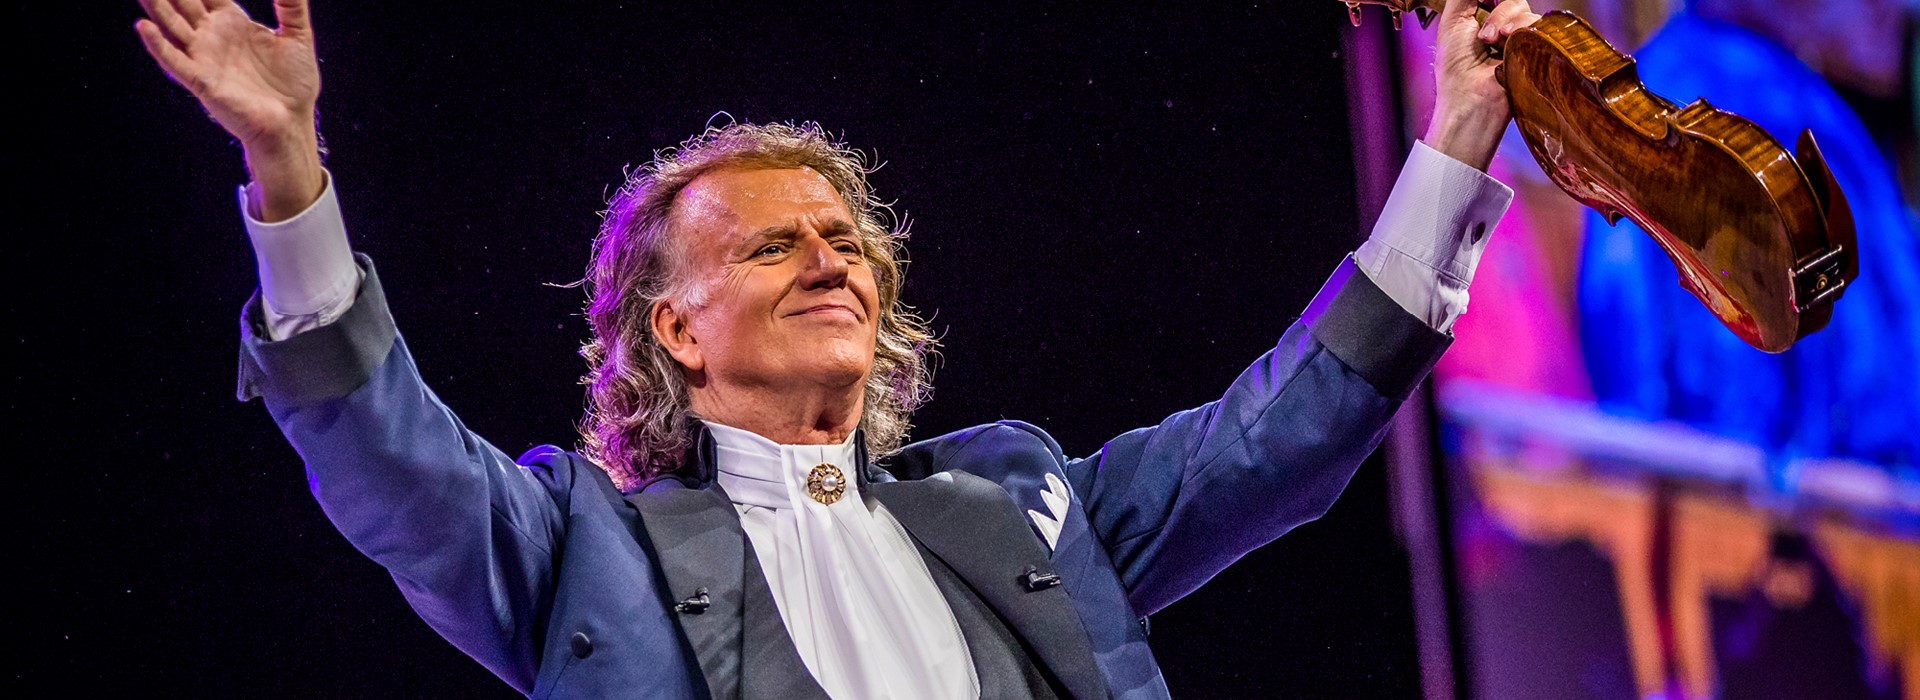 tourhub | Newmarket Holidays | Andre Rieu, 4 days in Manchester 